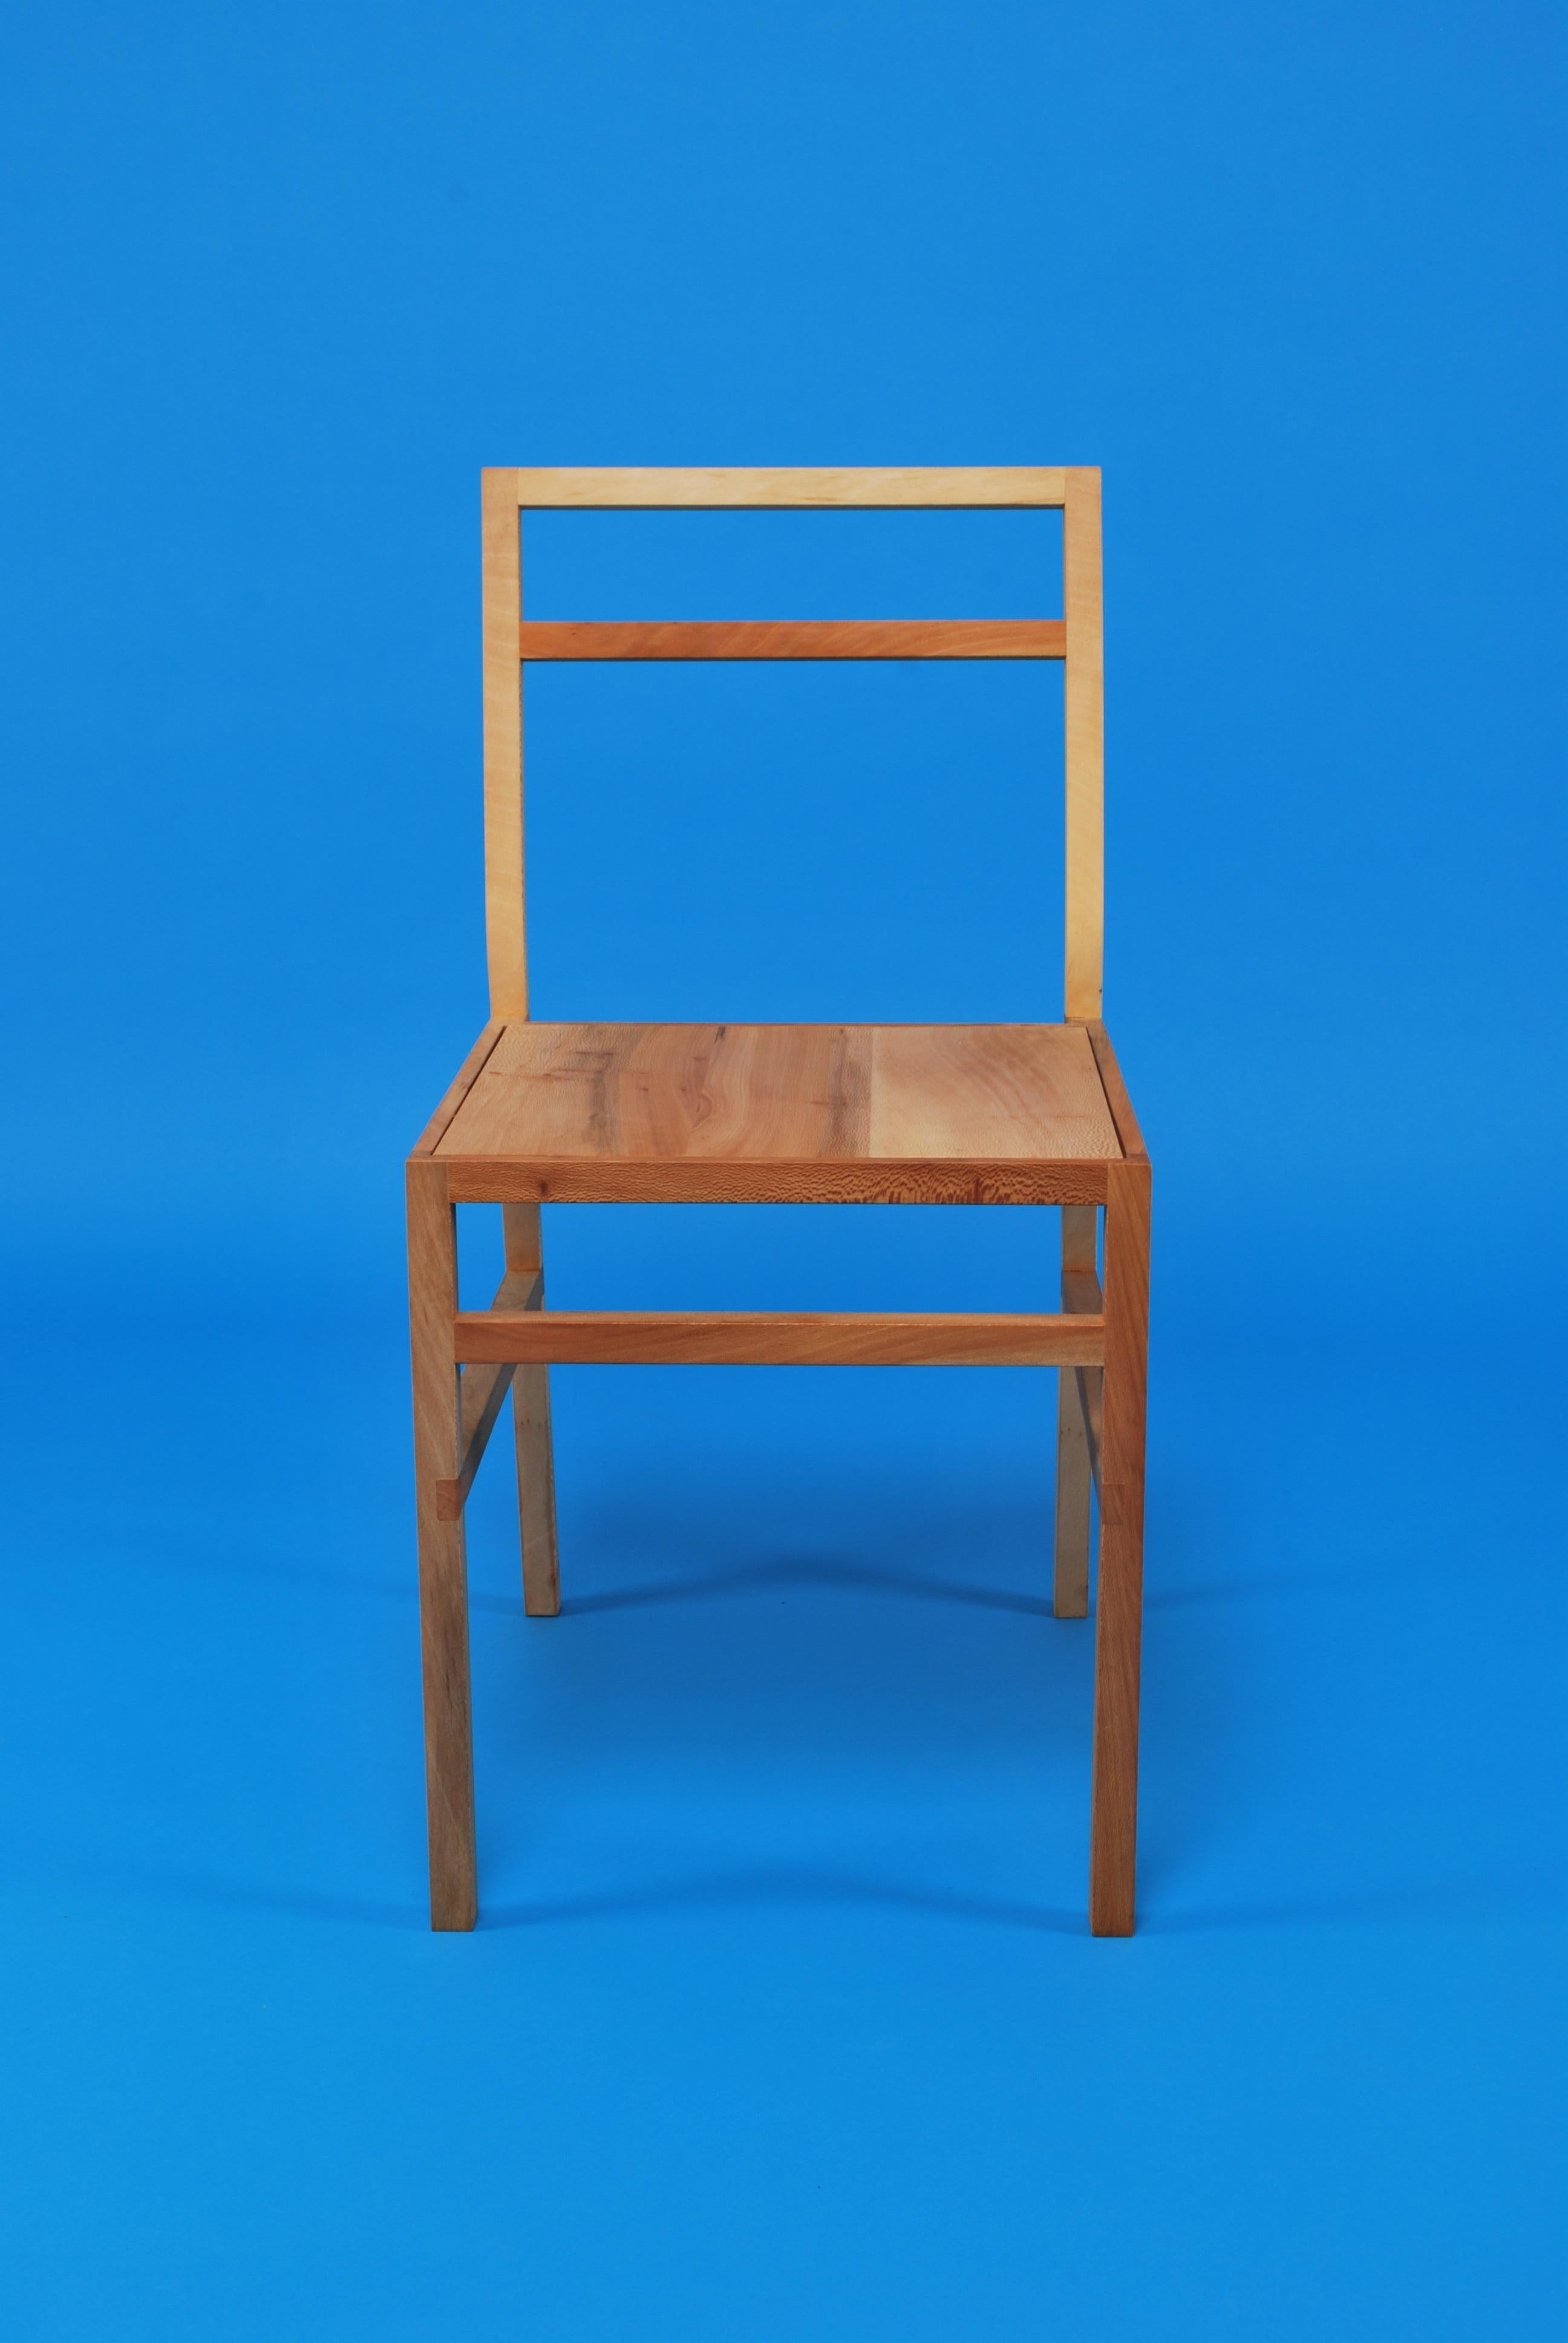 Organic Modern Dining Chair. Created by Loose Fit and handmade to order in the UK. Available in a choice of three timbers - English Oak, Ash or London Plane.
Simple and delicate in appearance, yet comfortable and durable enough for everyday